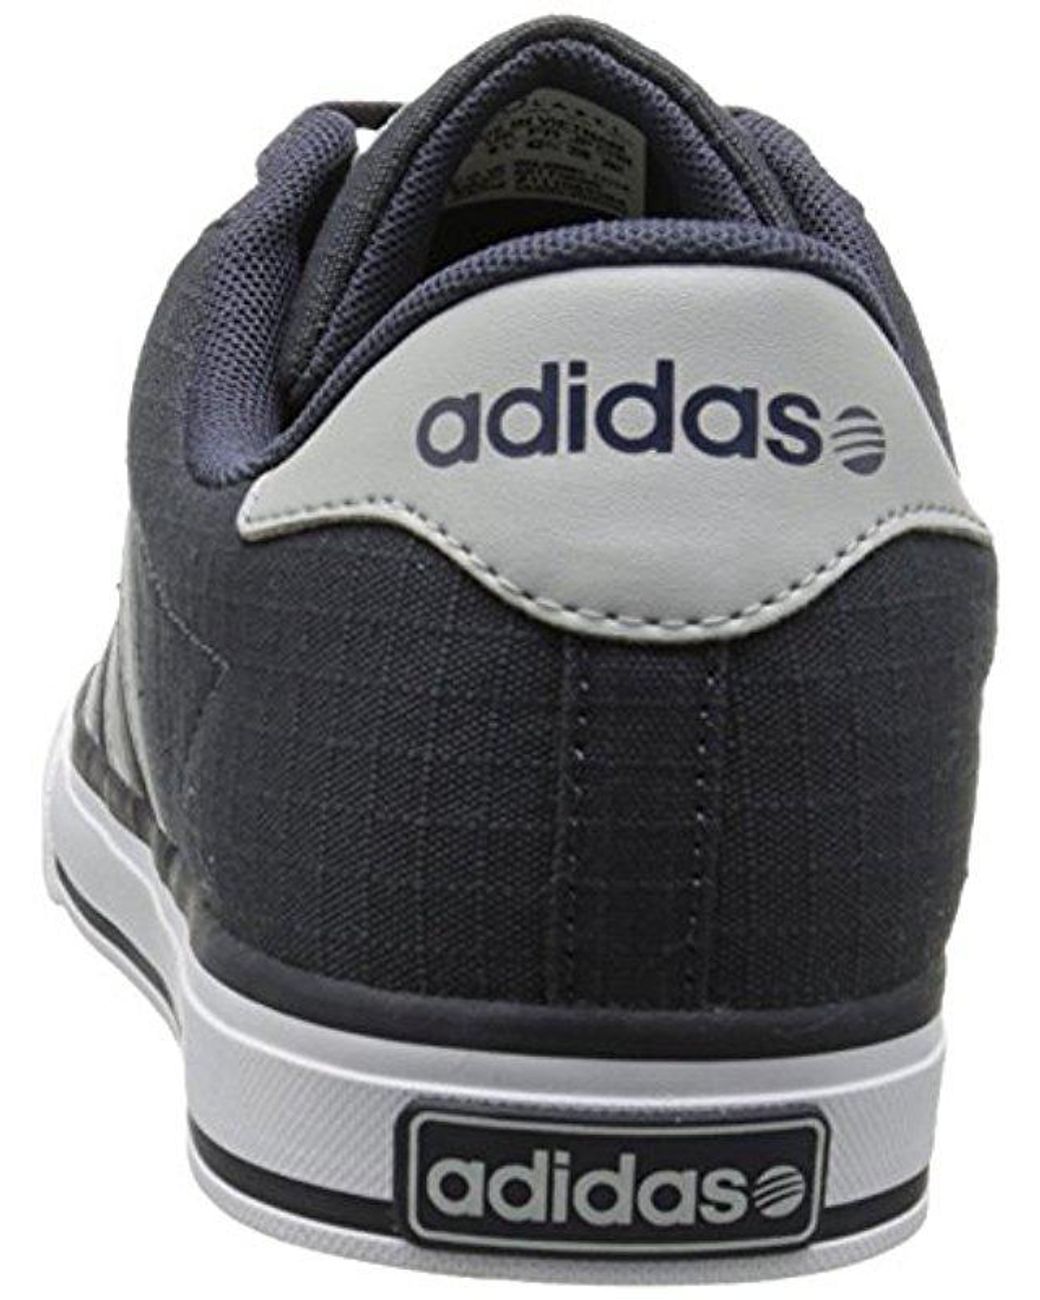 adidas Neo Daily Vulc Lifestyle Skateboarding Shoe in Gray |